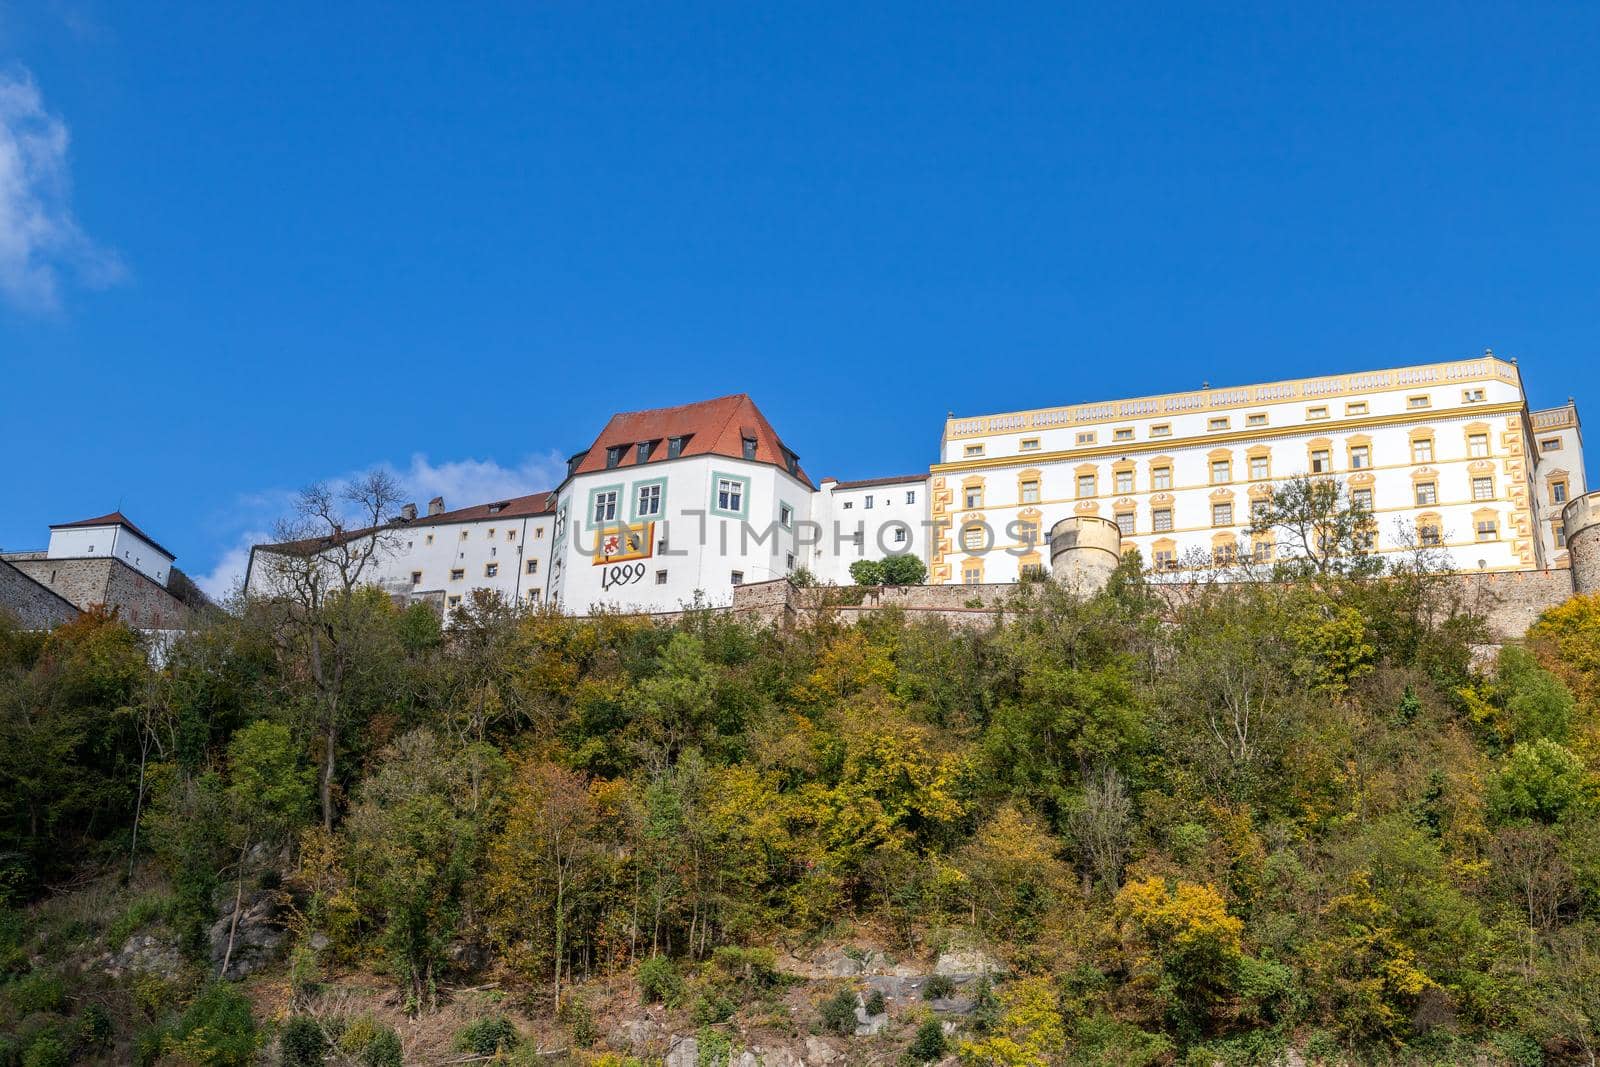 View at fortress Veste Oberhaus in Passau during a ship excursion in autumn with colorfull trees